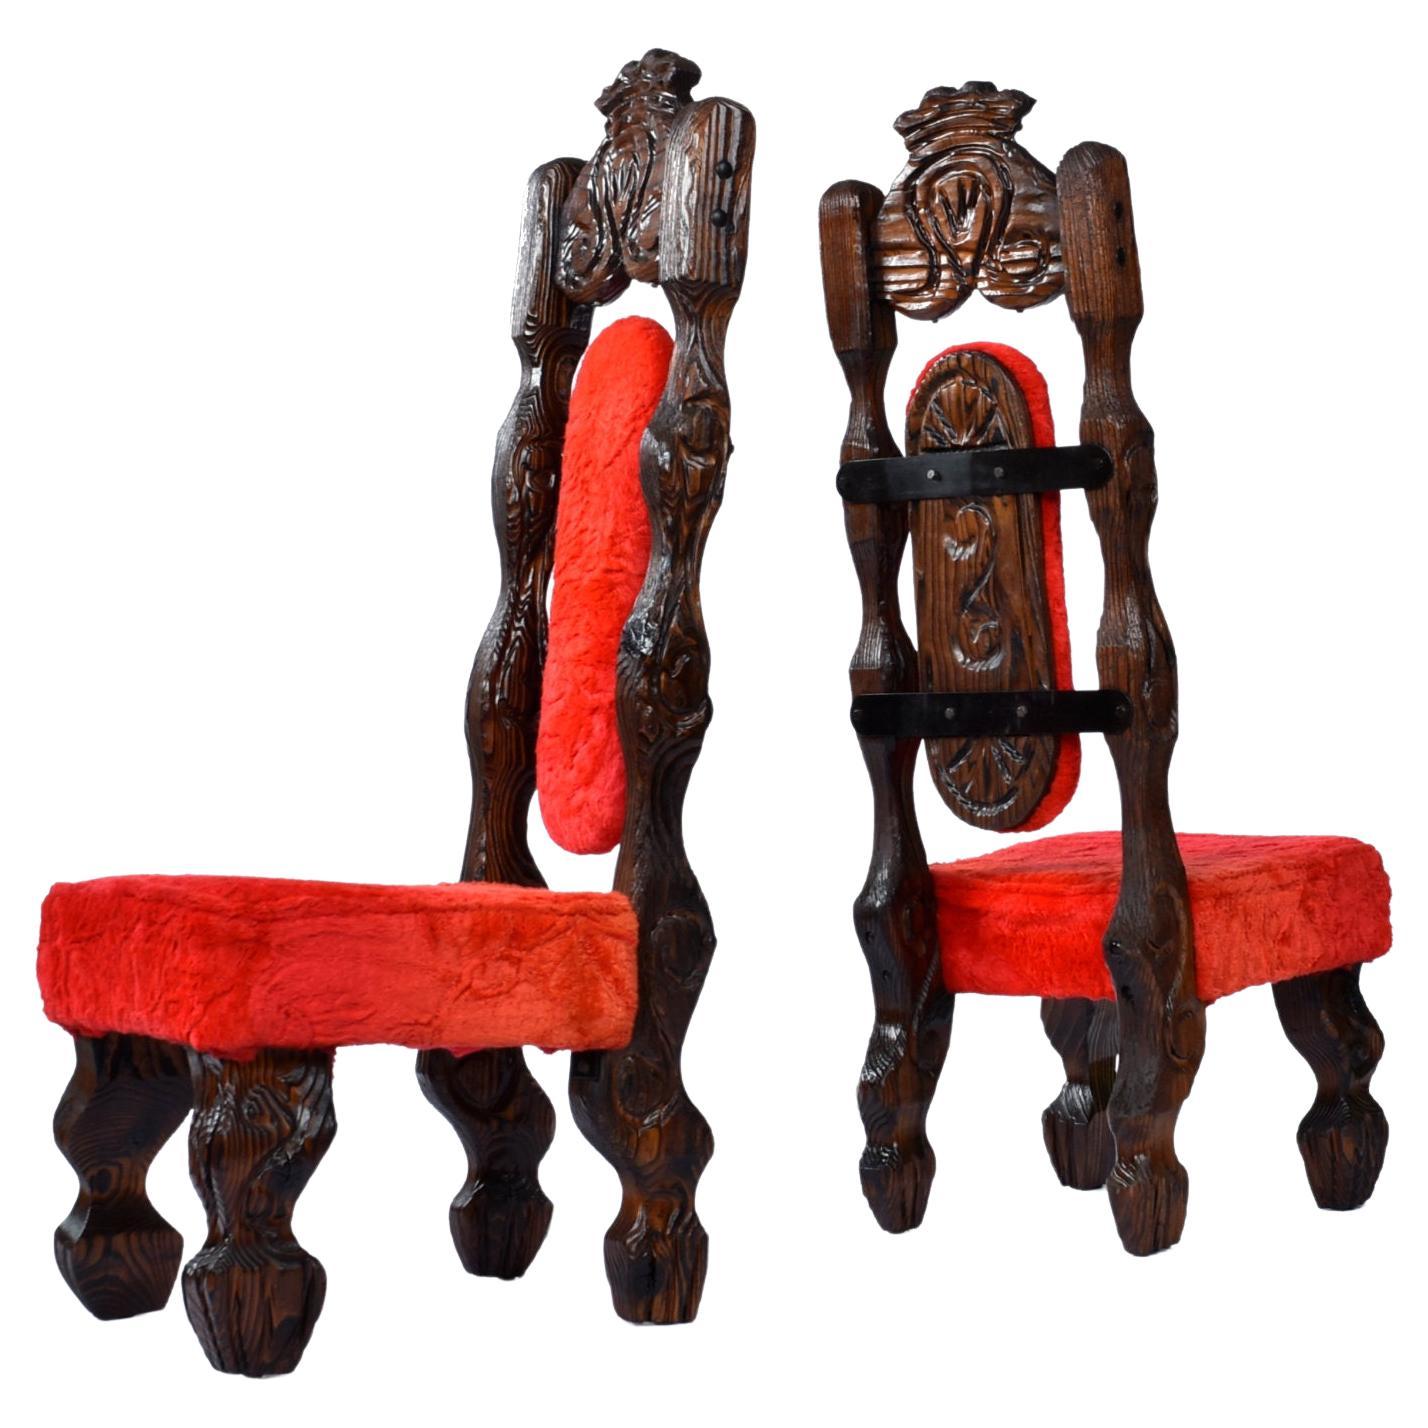 Pair of restored Witco Conquistador tiki dramatic high-back chairs in original red fur. These chairs are absolutely wild in the best kind of way. The original red fur fabric has a thick pile. This bright red upholstery adds drama to the high-back,